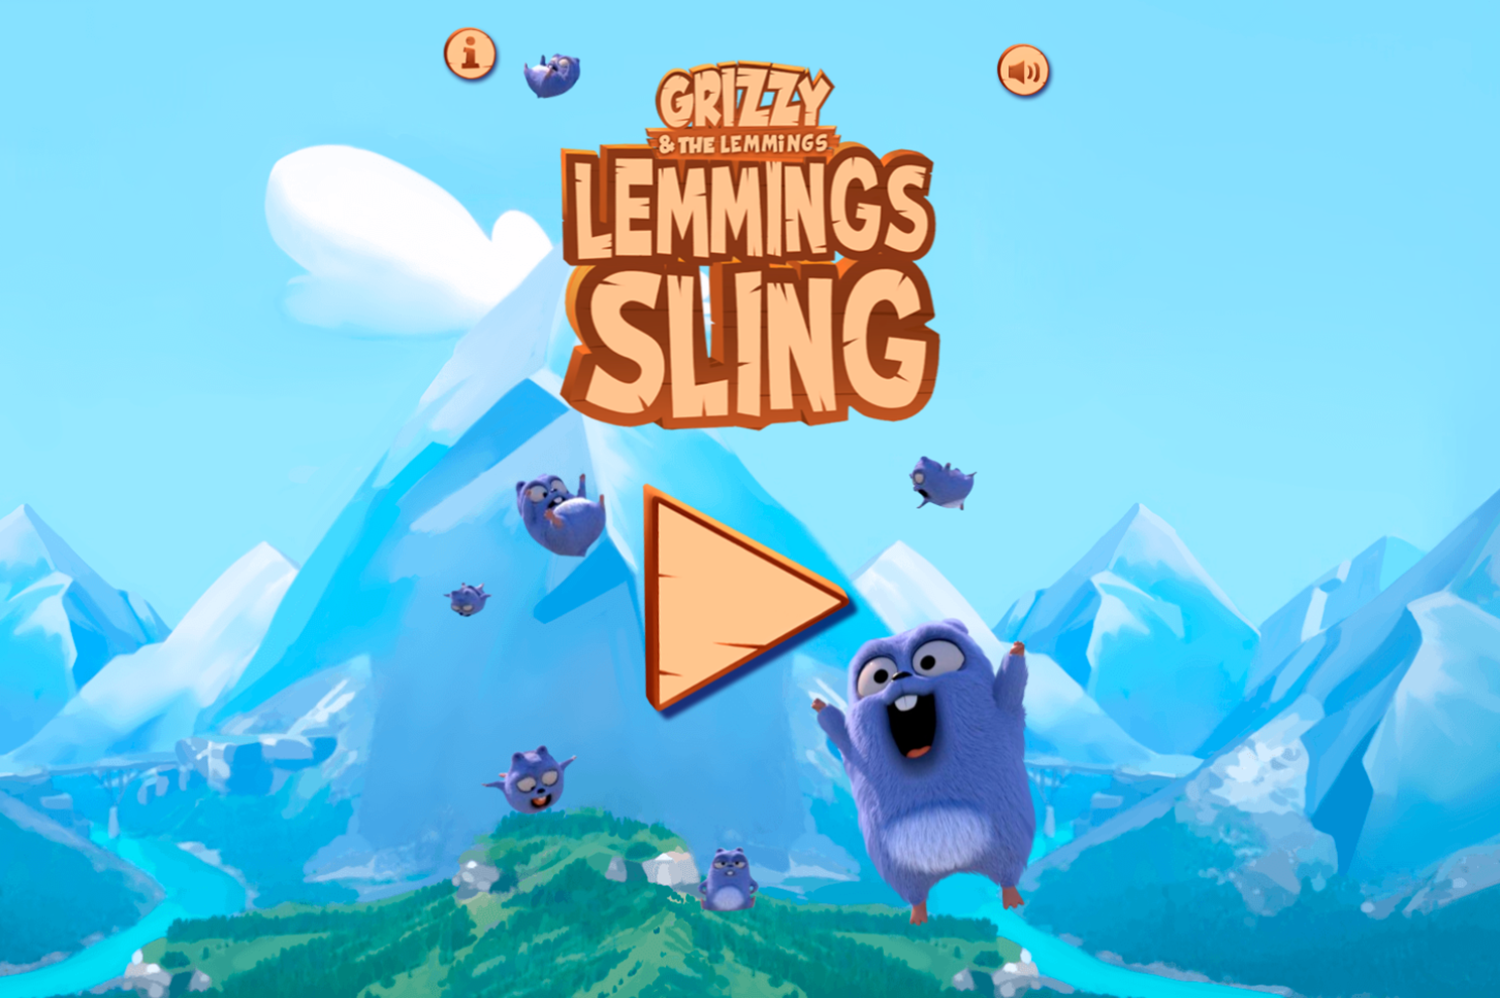 Grizzy and the Lemmings Lemmings Sling Game Welcome Screen Screenshot.